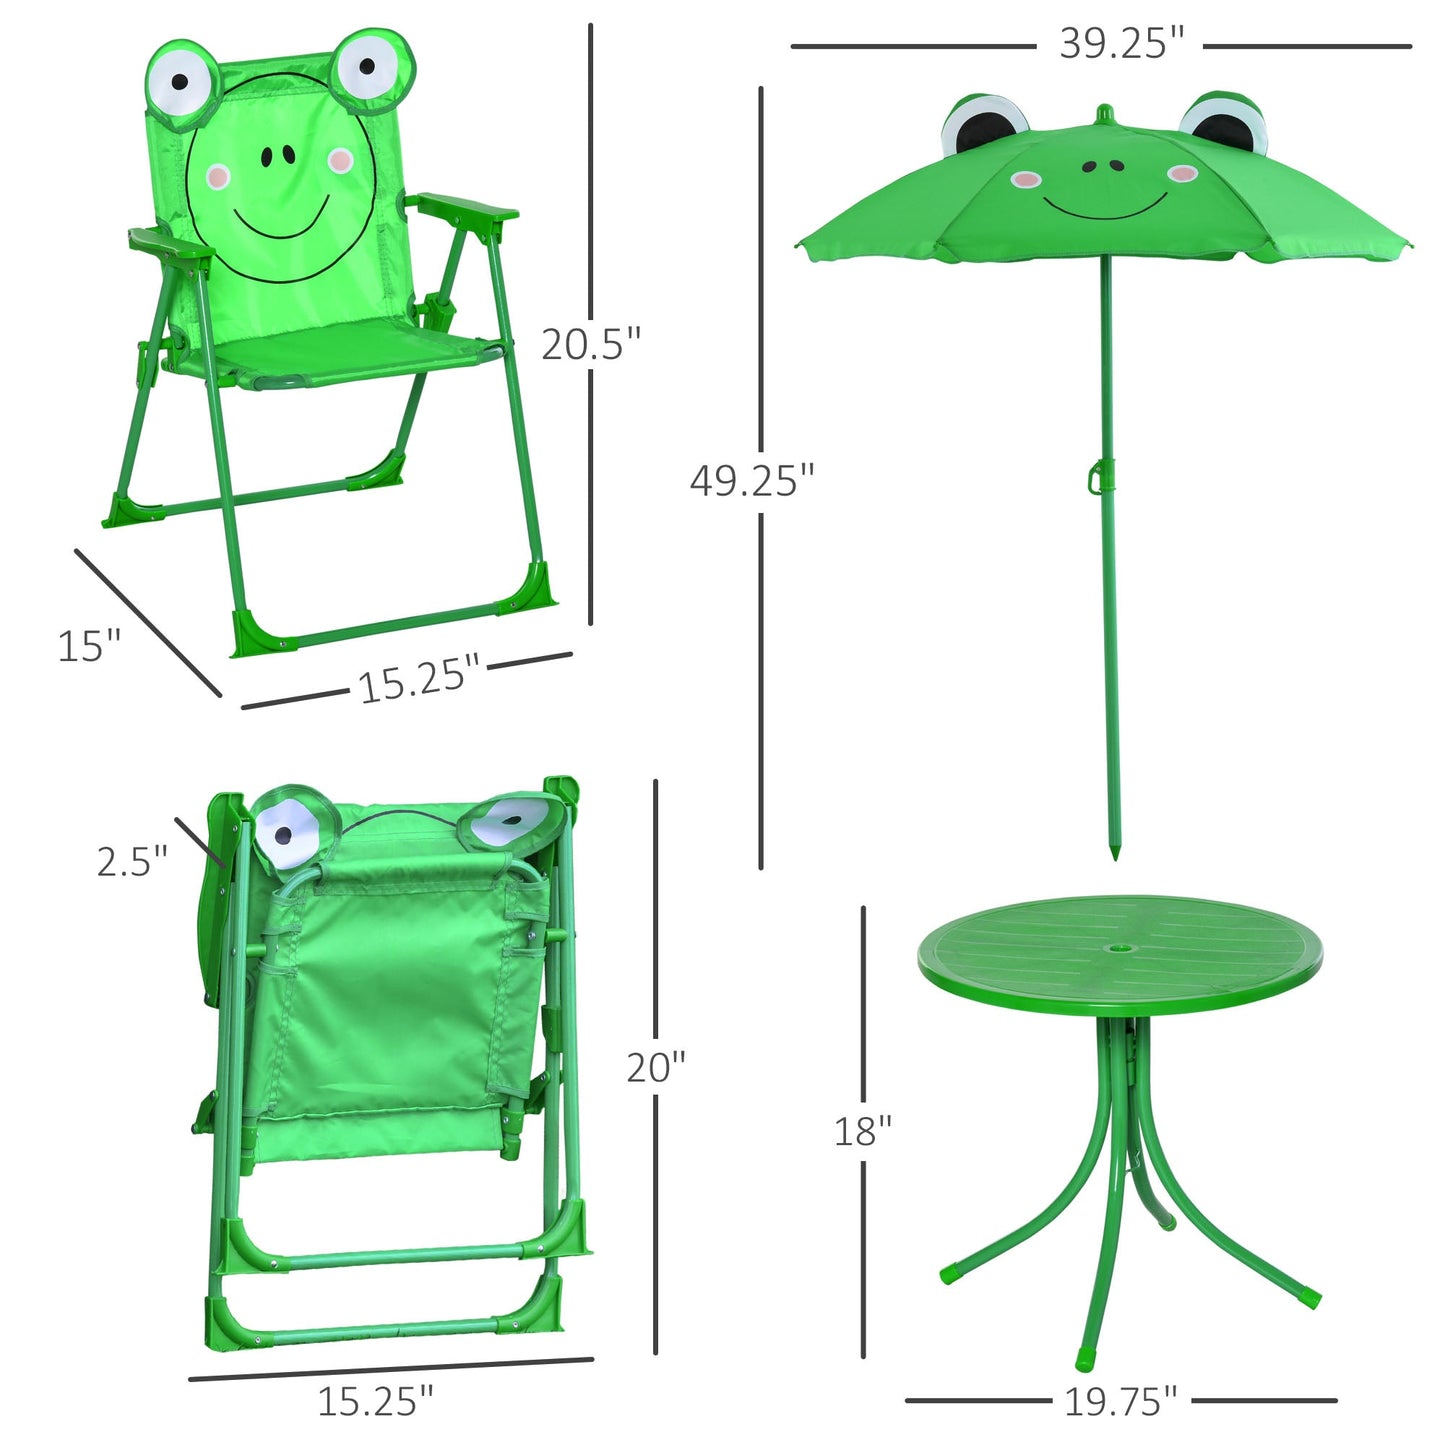 -Outsunny Kids Folding Picnic Table and Chair Set Frog Pattern with Removable & Height Adjustable Sun Umbrella, Green - Outdoor Style Company